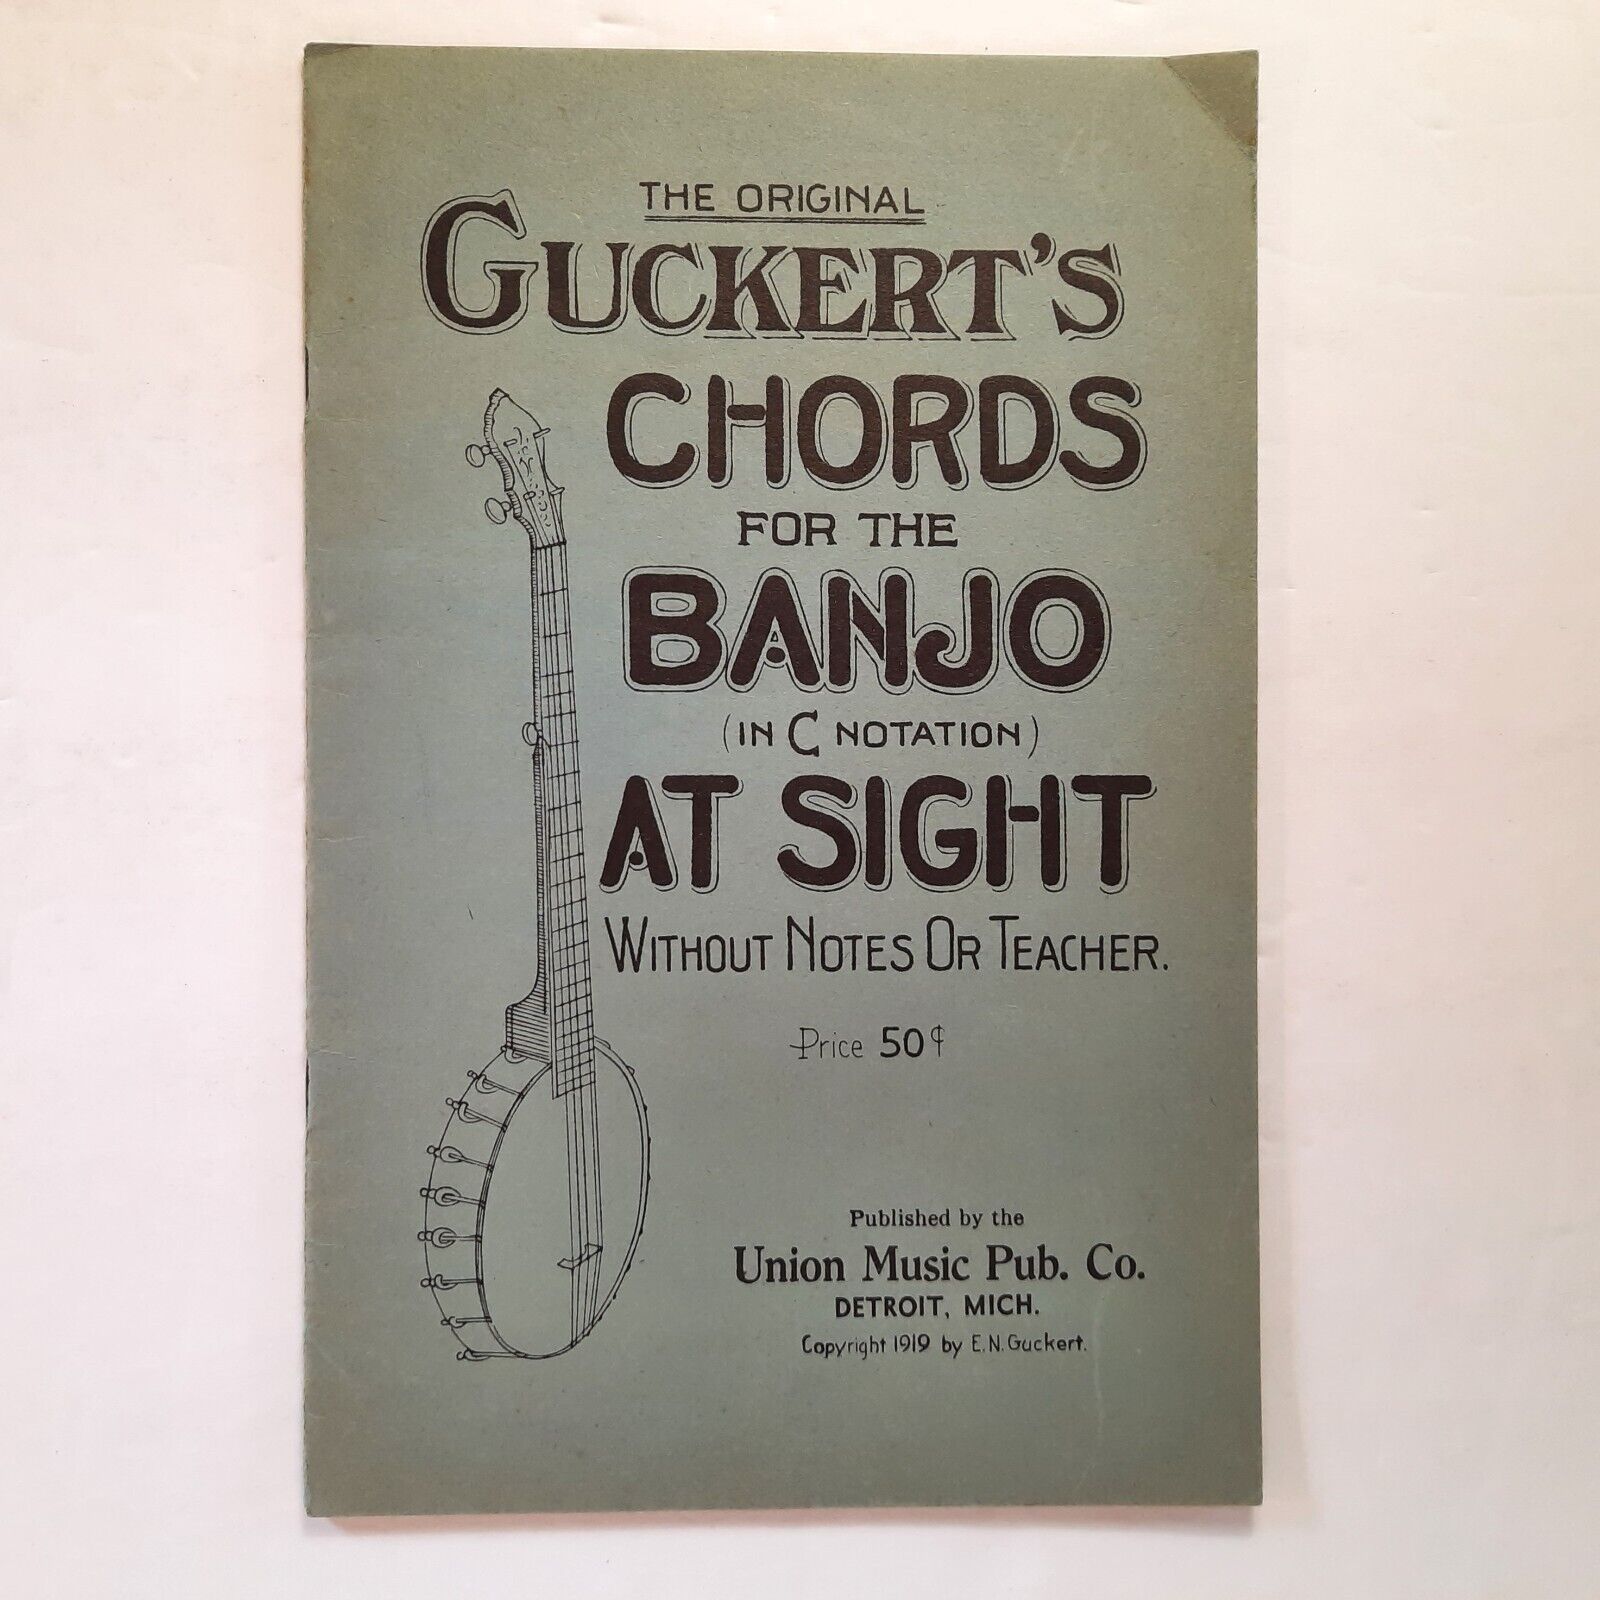 1919 The Original Guckerts Chords For The Banjo   C Notation   Very Good